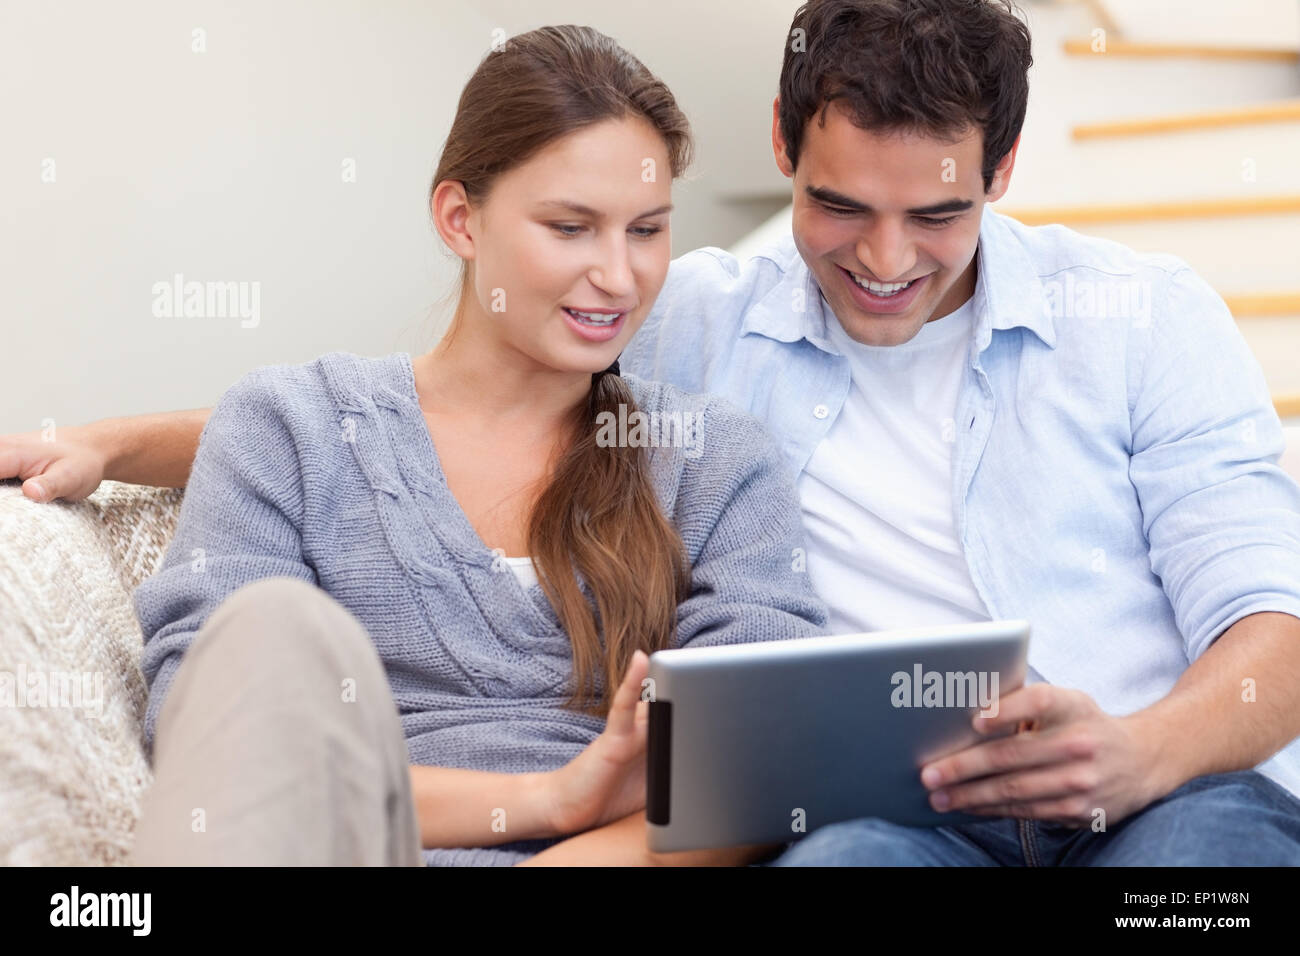 Couple using a tablet computer Stock Photo